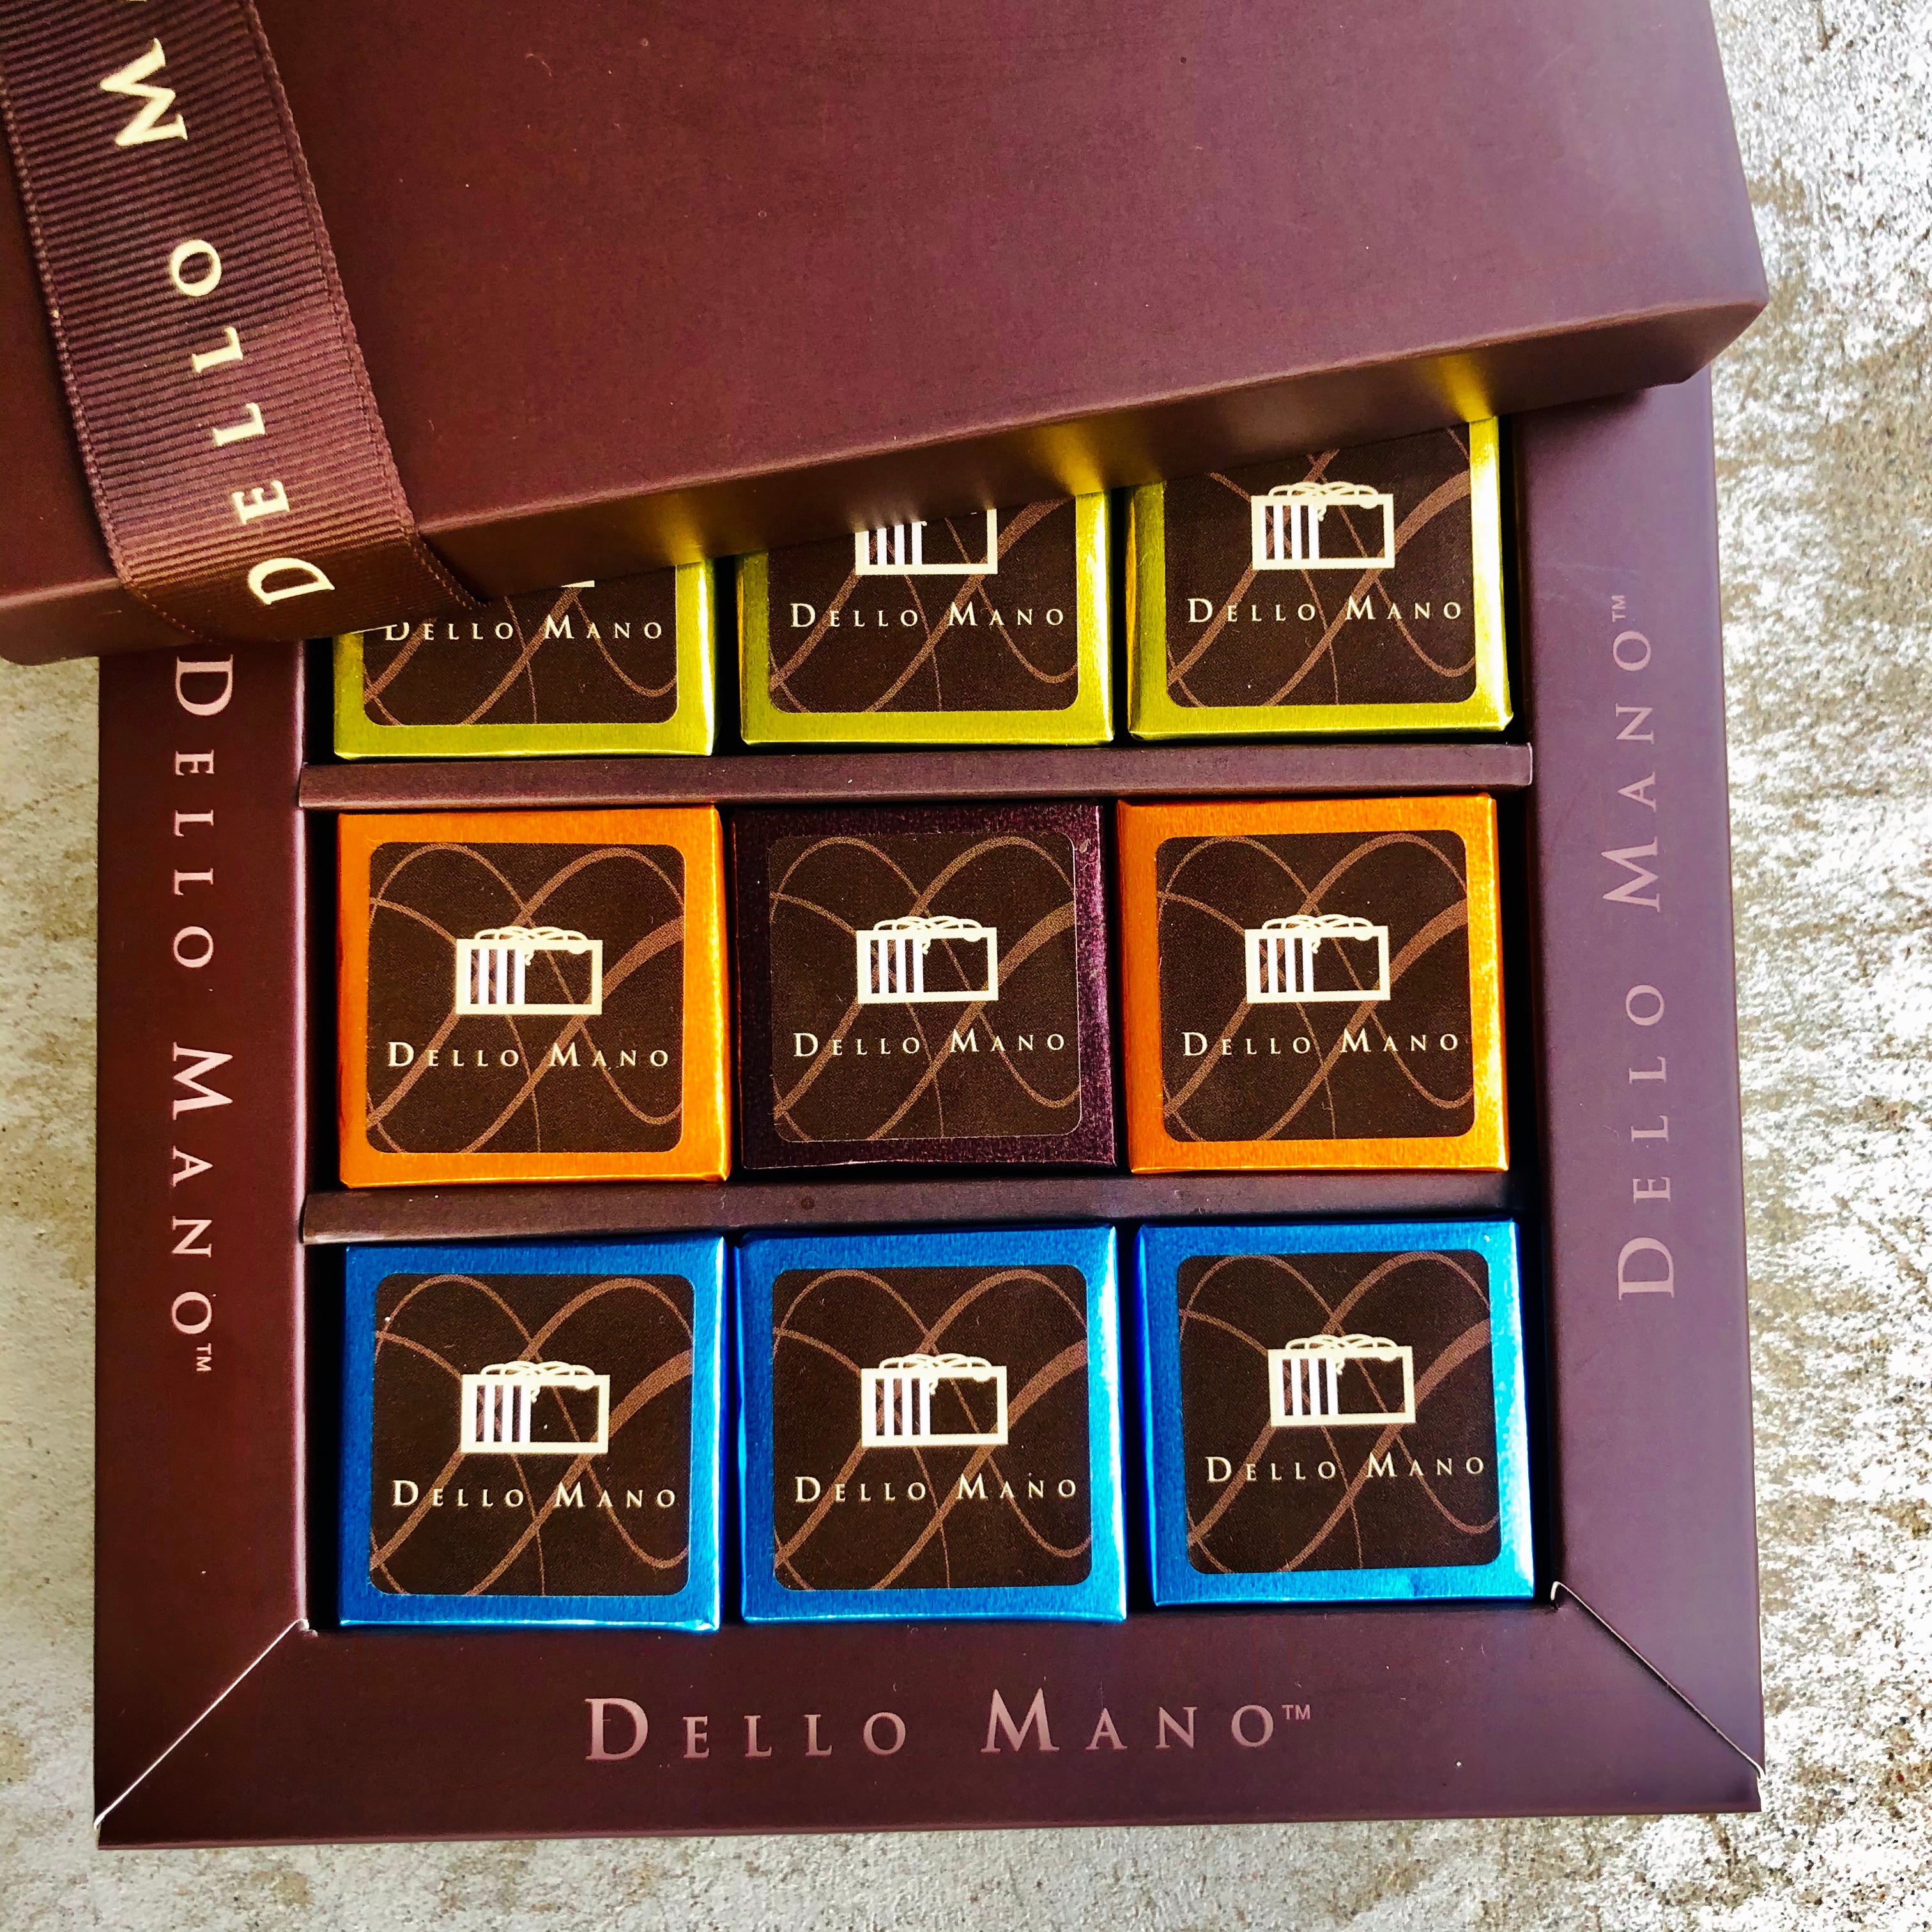 NIne brownie cubes sitting in an open chocolate box. The box says Dello Mano. The lid has a brown grossgrain ribbon.